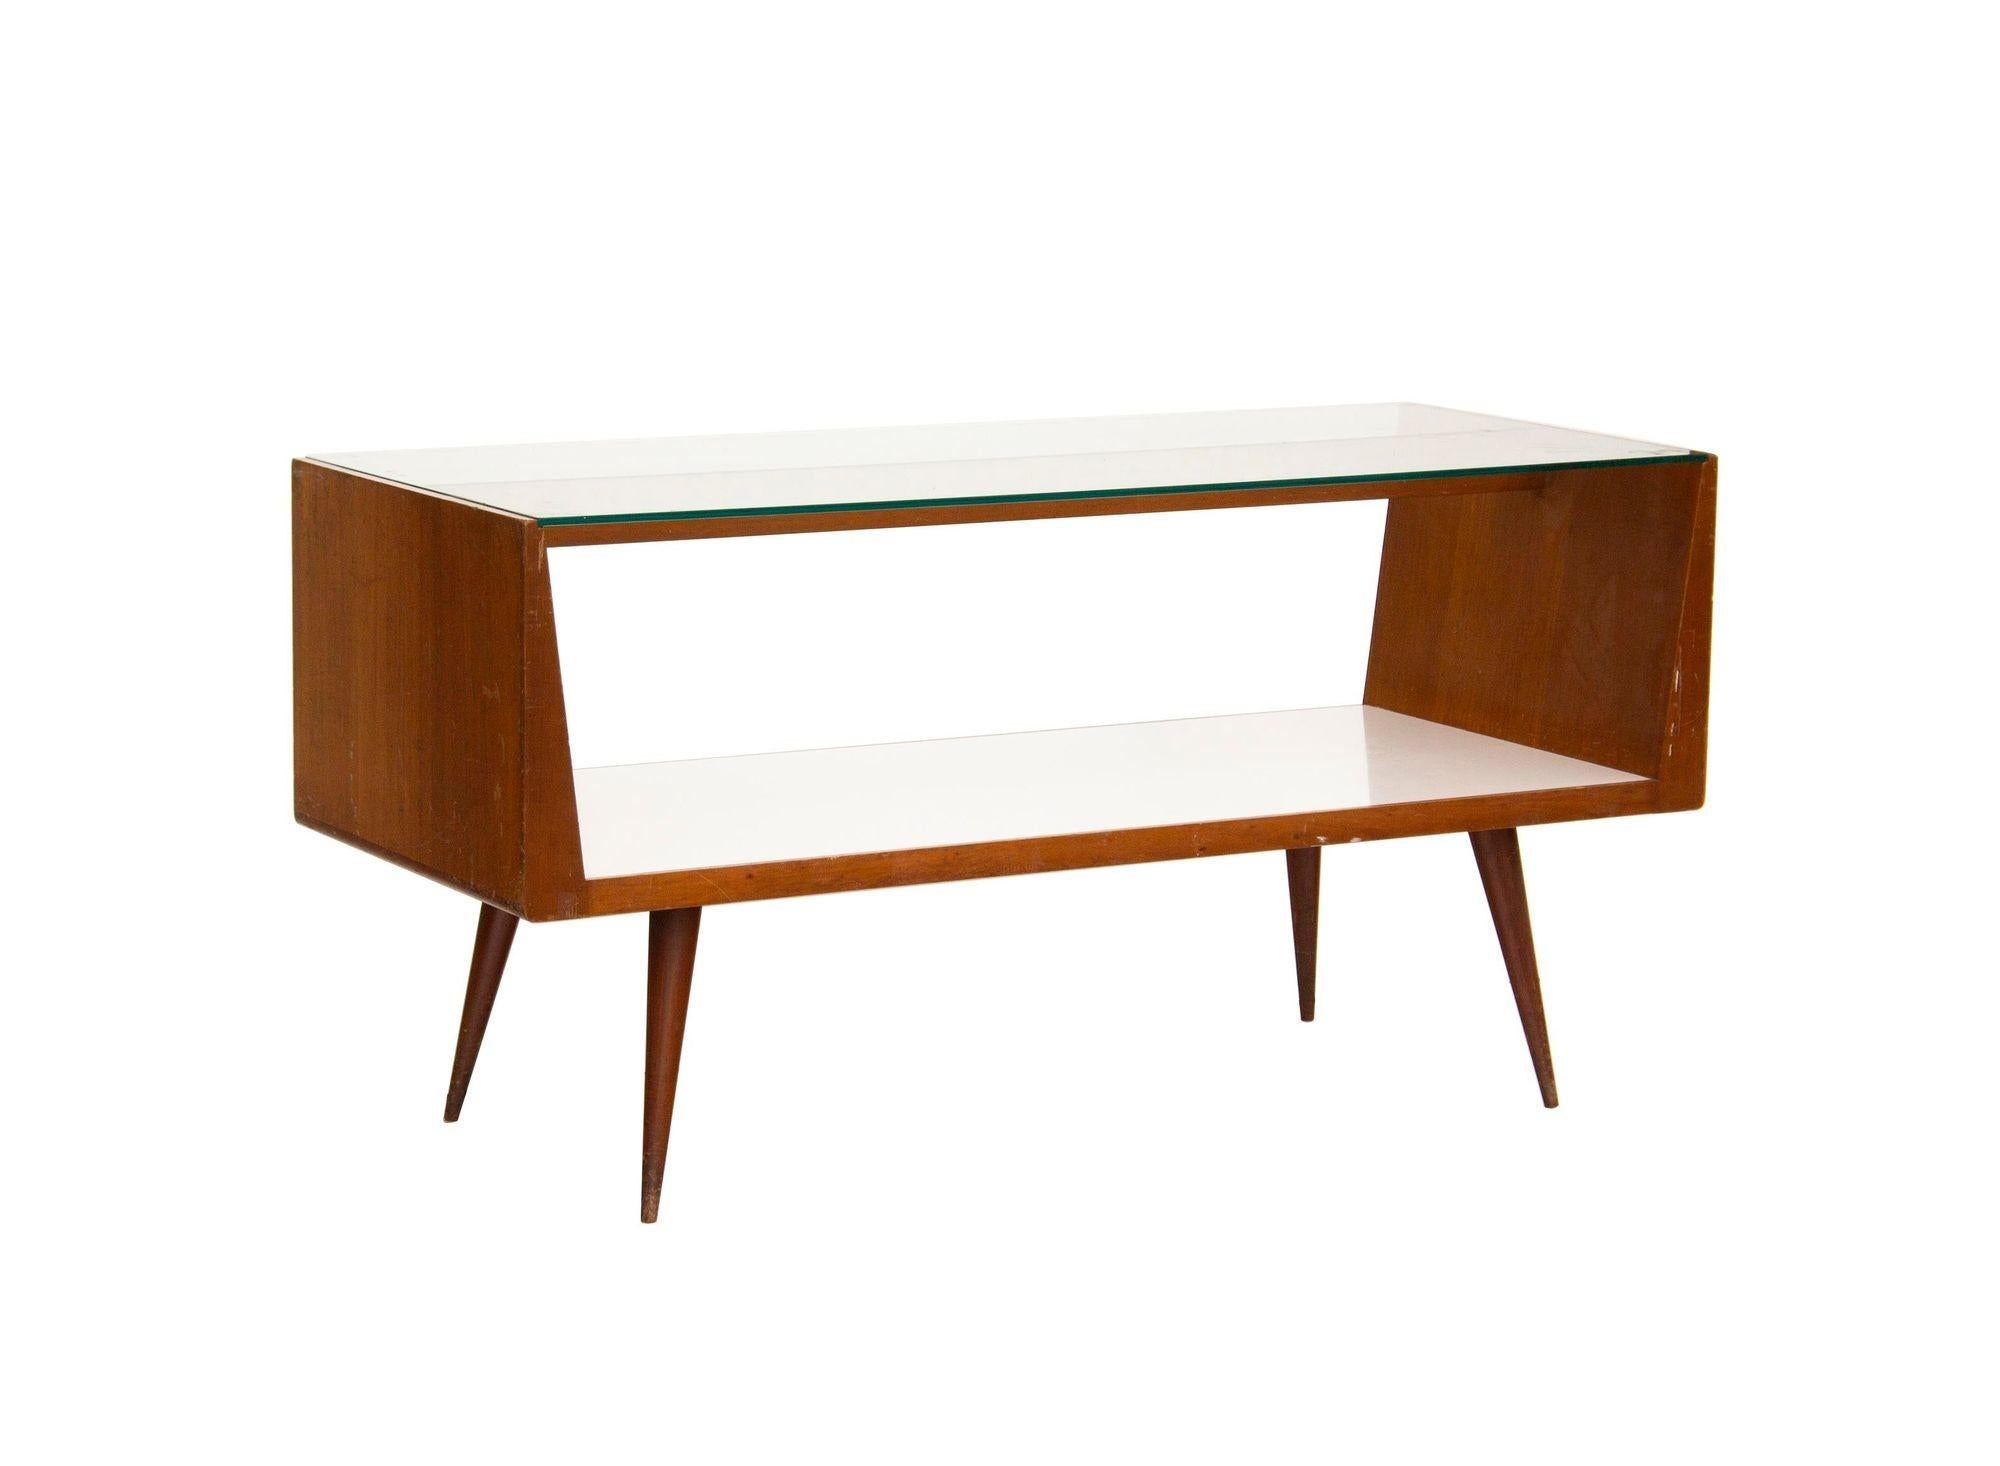 USA, 1960s
A matched pair of midcentury modern walnut and glass display cases. These were likely originally used as some kind of retail store display. They have striking angular lines in warm old growth walnut, a white laminate surface, and thick